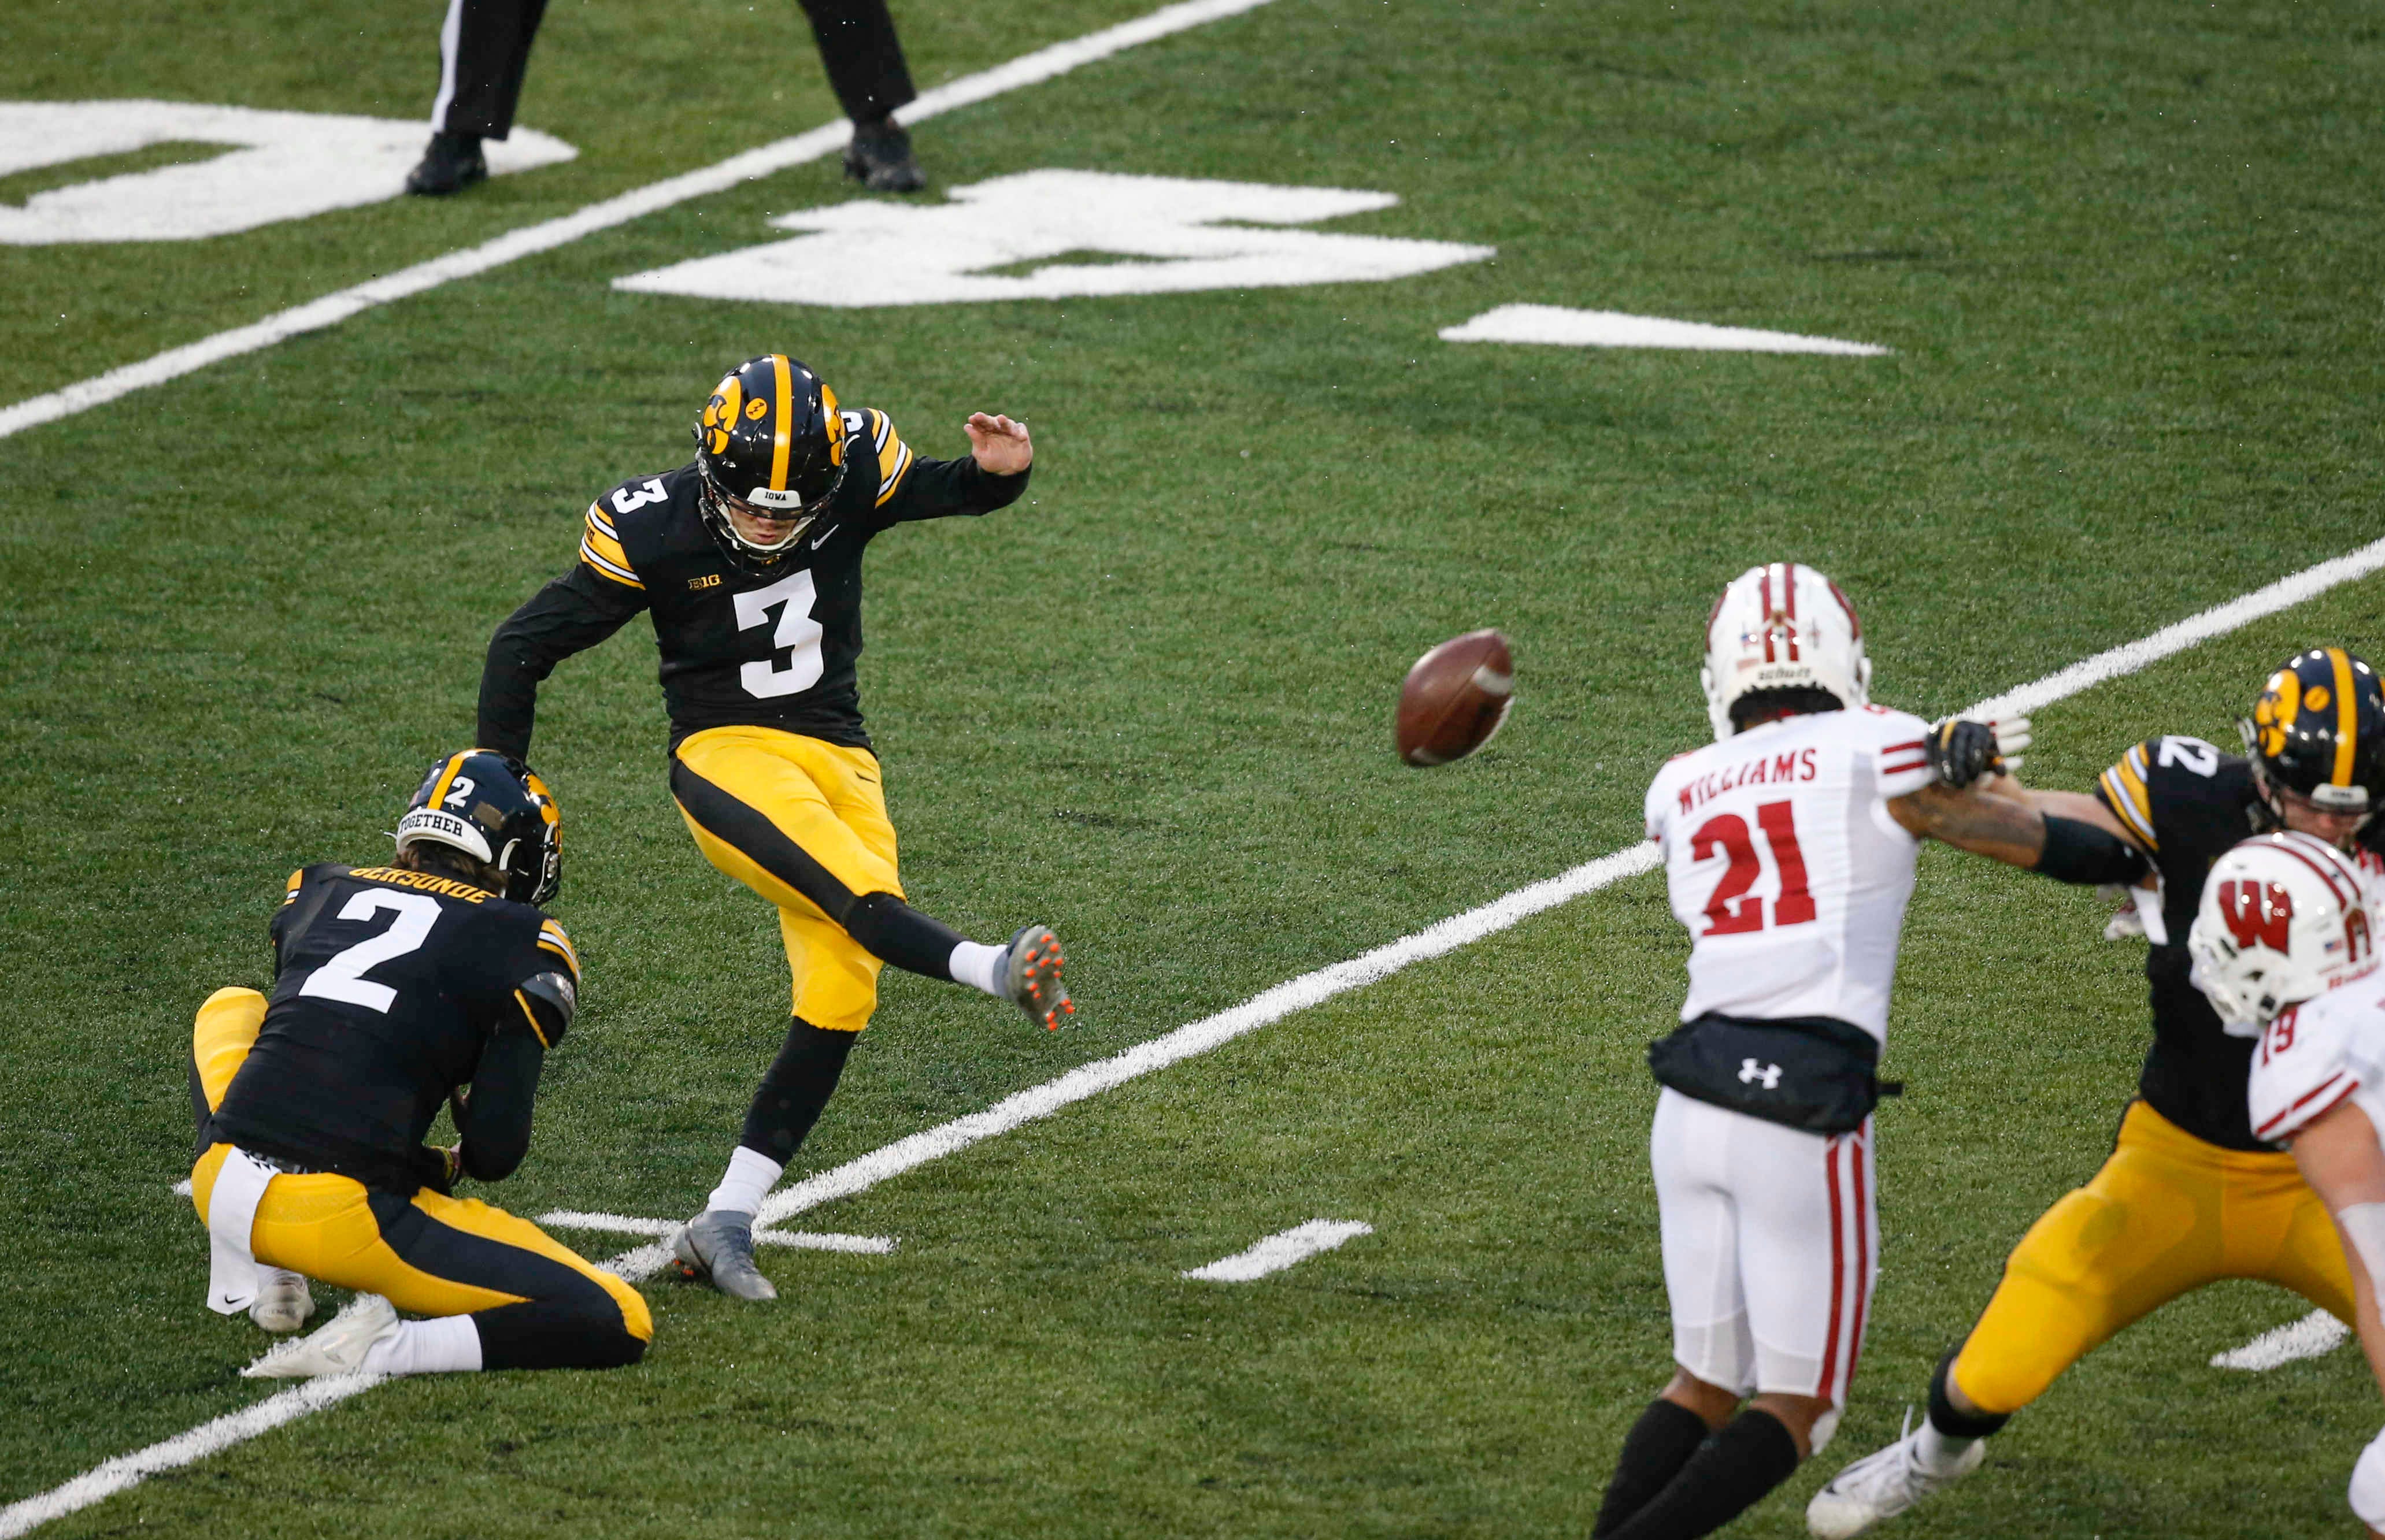 Iowa senior place kicker Keith Duncan strikes the ball for a field goal in the second quarter against Wisconsin on Saturday, Dec. 12, 2020, at Kinnick Stadium in Iowa City, Iowa.